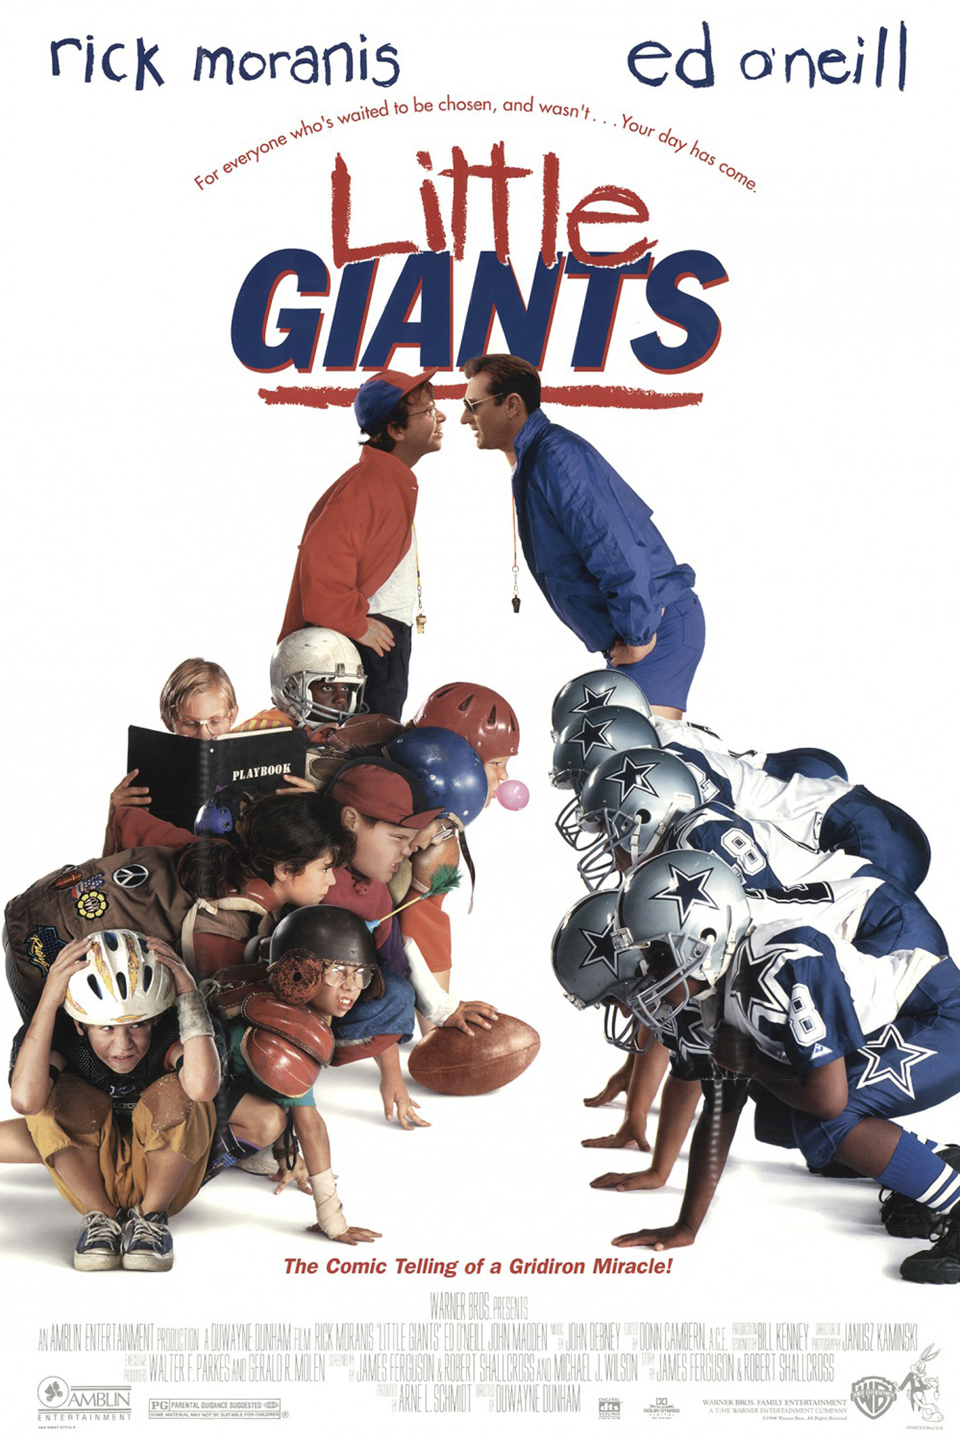 Why many Connecticut viewers won't see the Giants on TV this Sunday